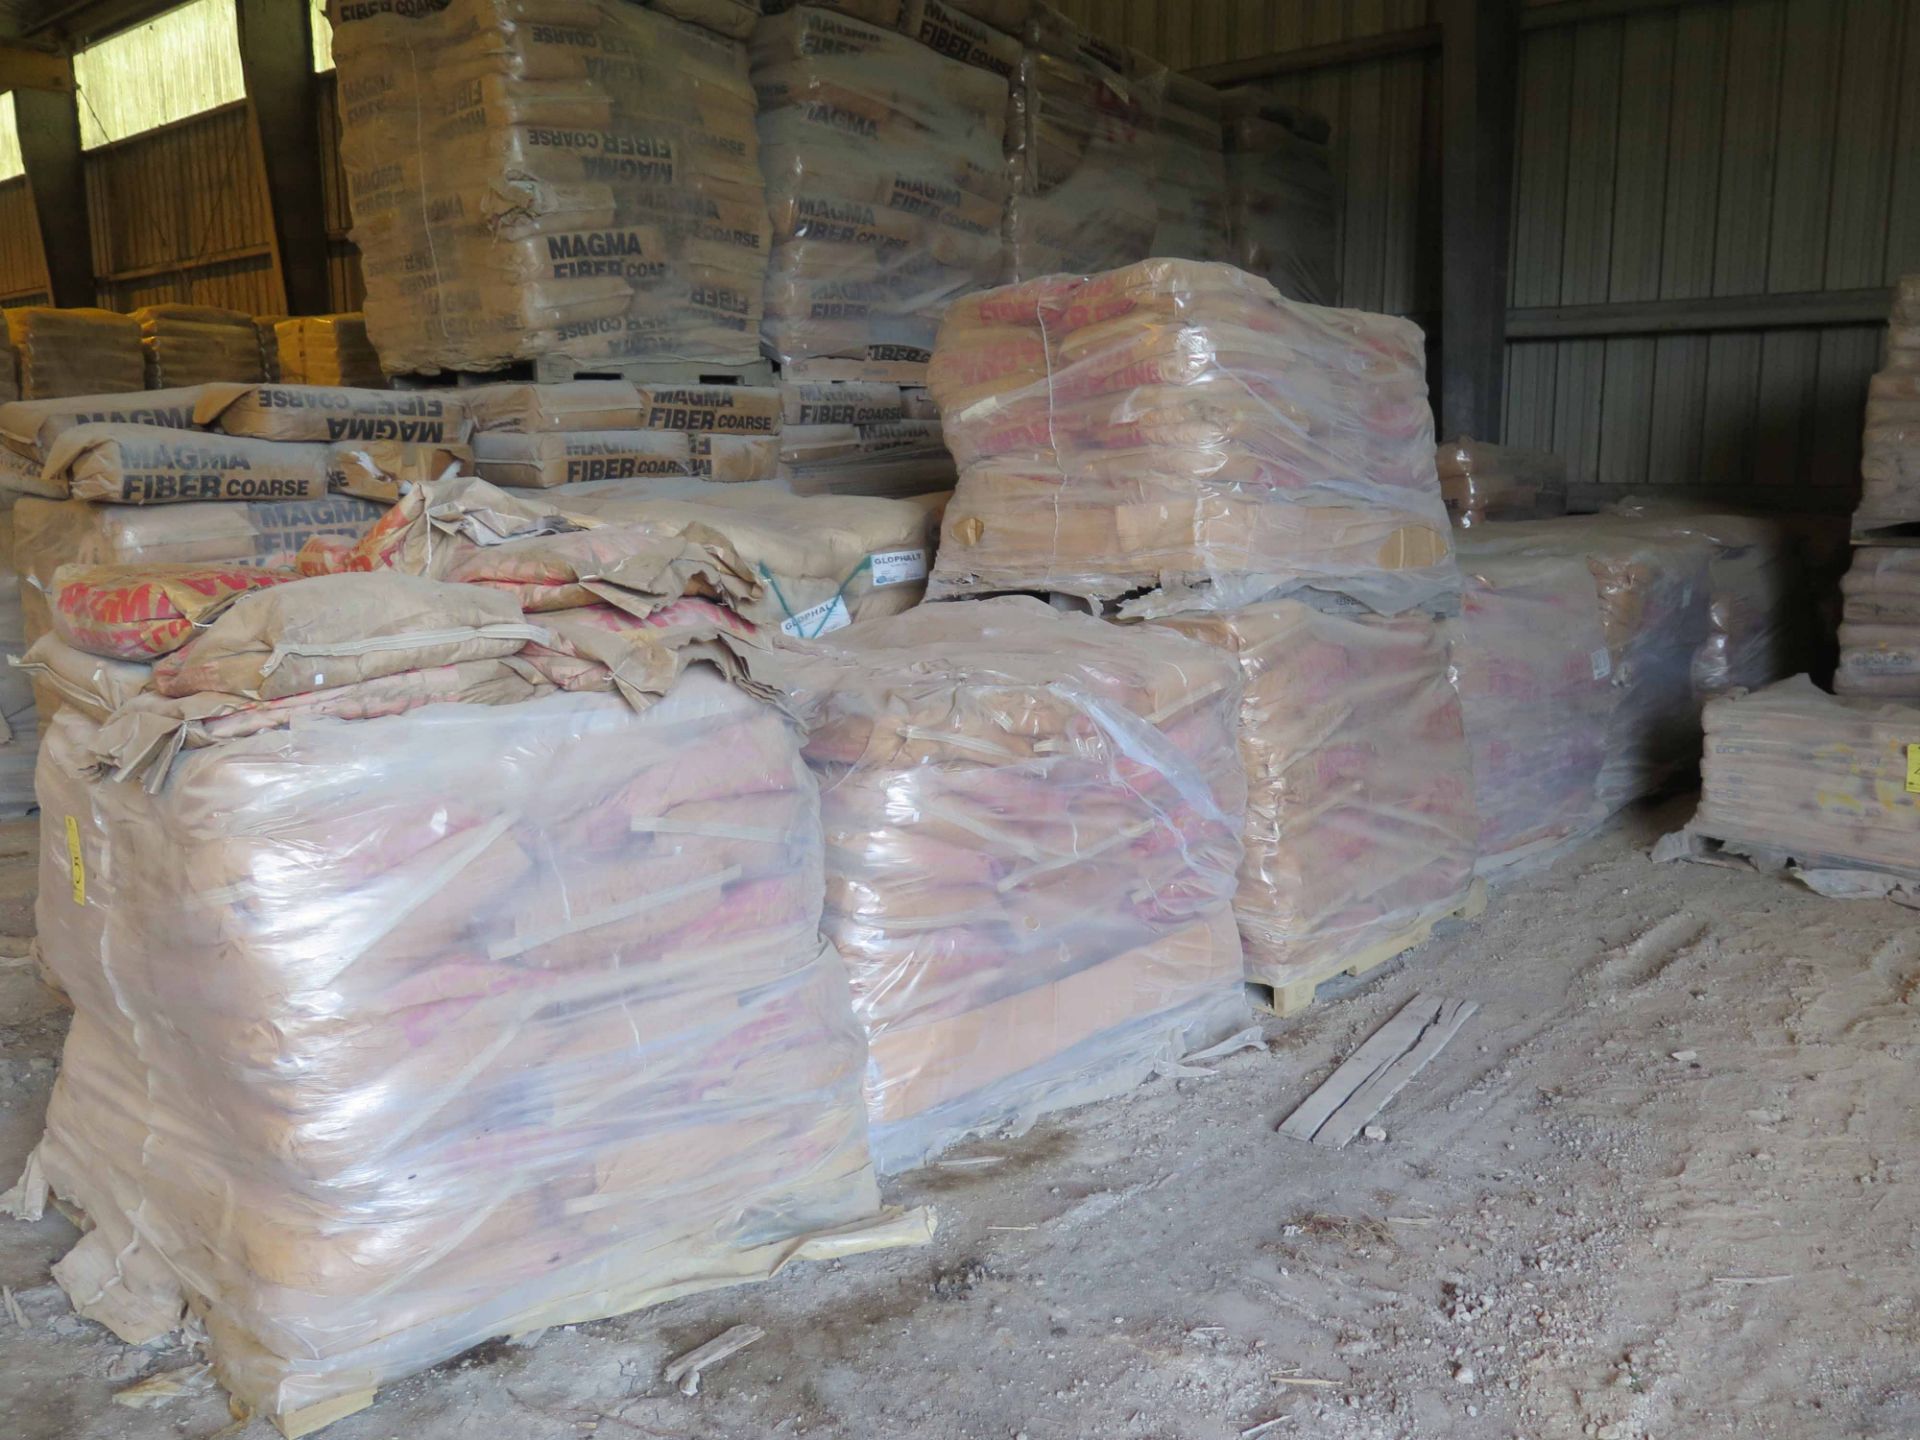 LOT OF MAGMA FIBER FINE (approx. 376 bags) (Location #1: 374 Walter White Road, Trinity, TX 75862)